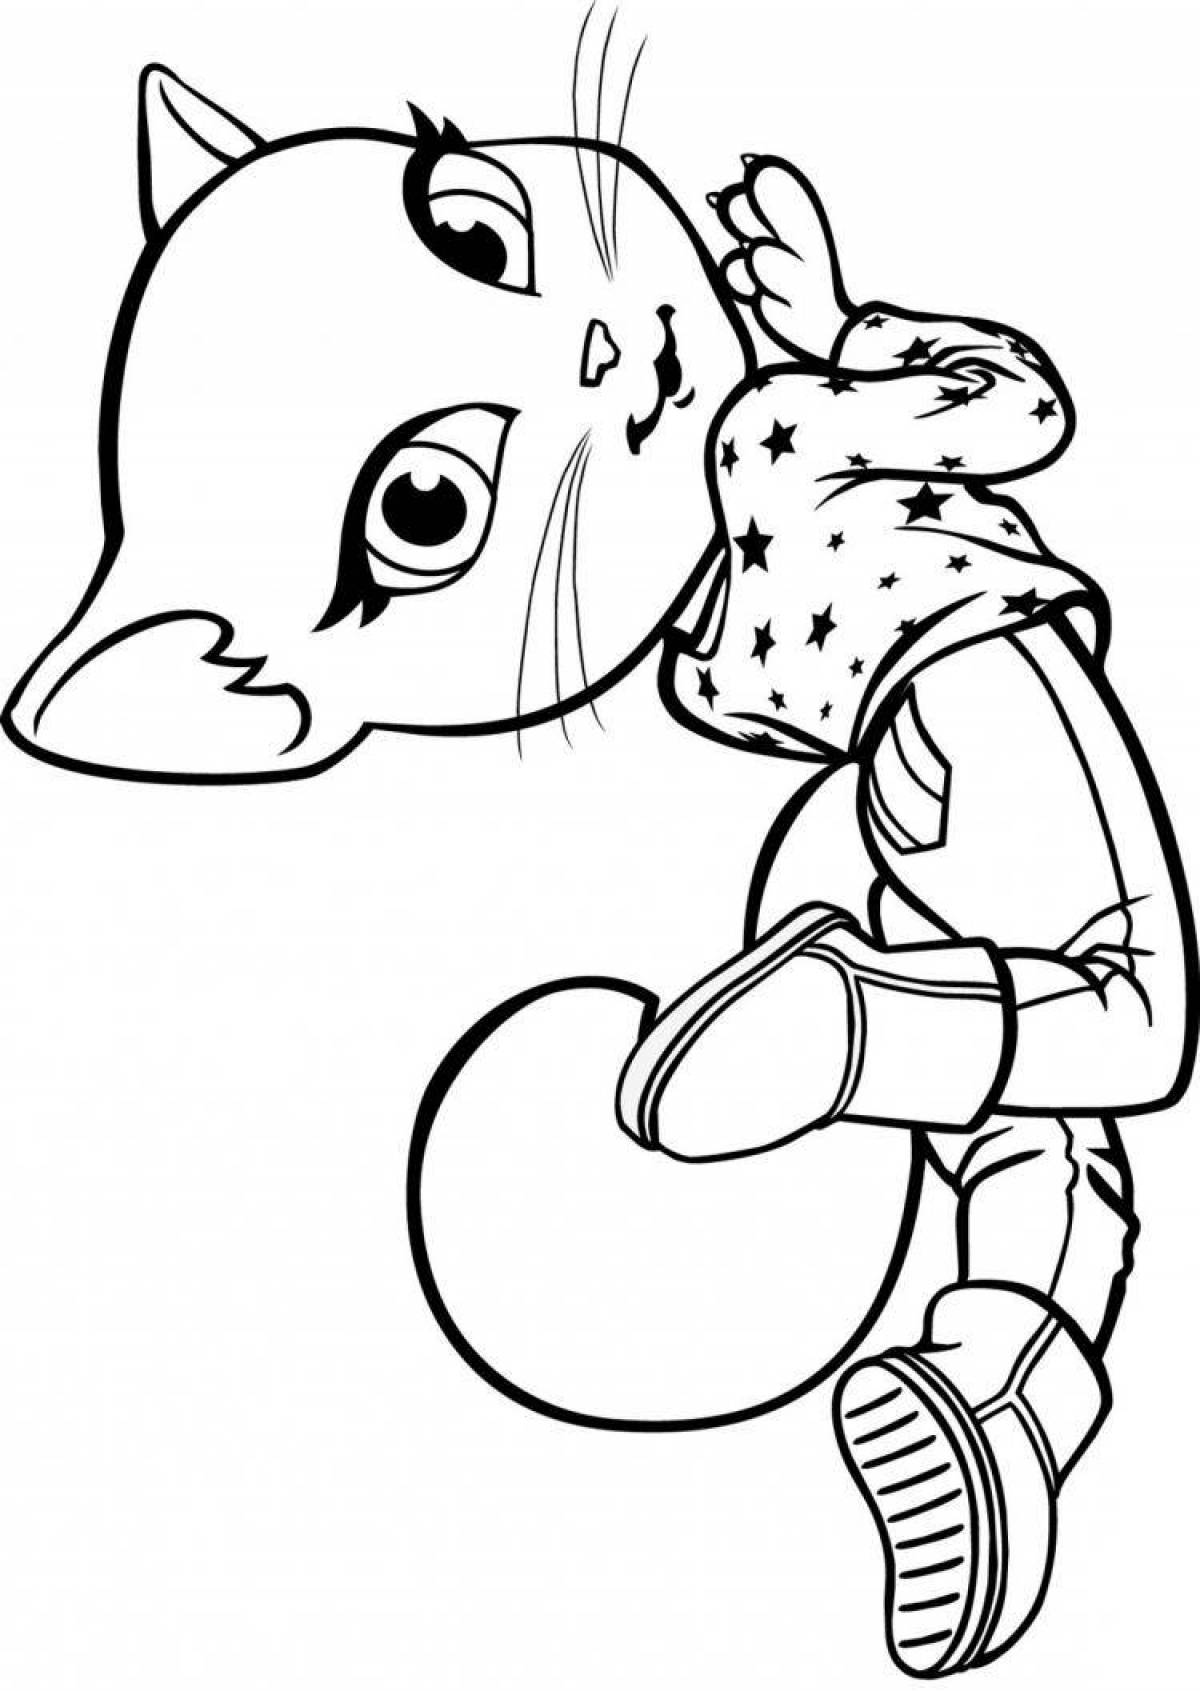 Cute tom and angela coloring pages for kids